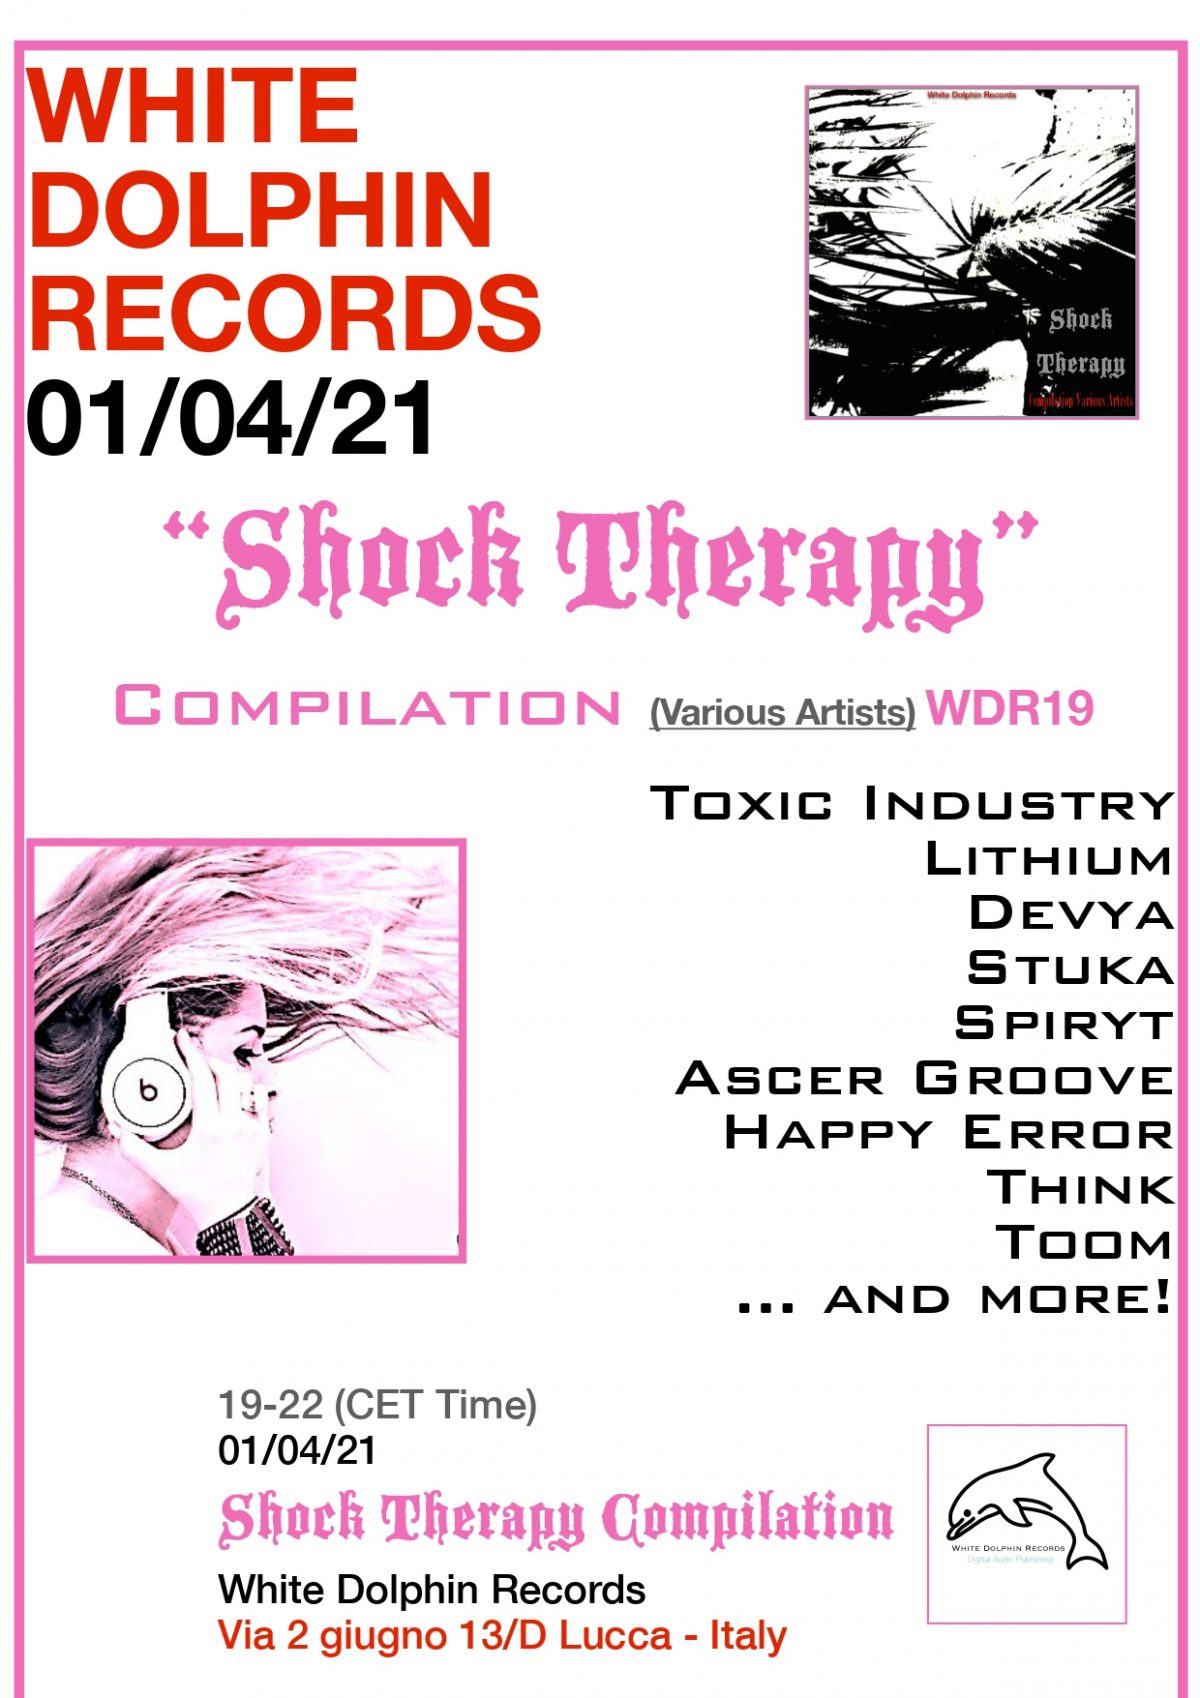 Fuori “Shock Therapy” Compilation A/B!